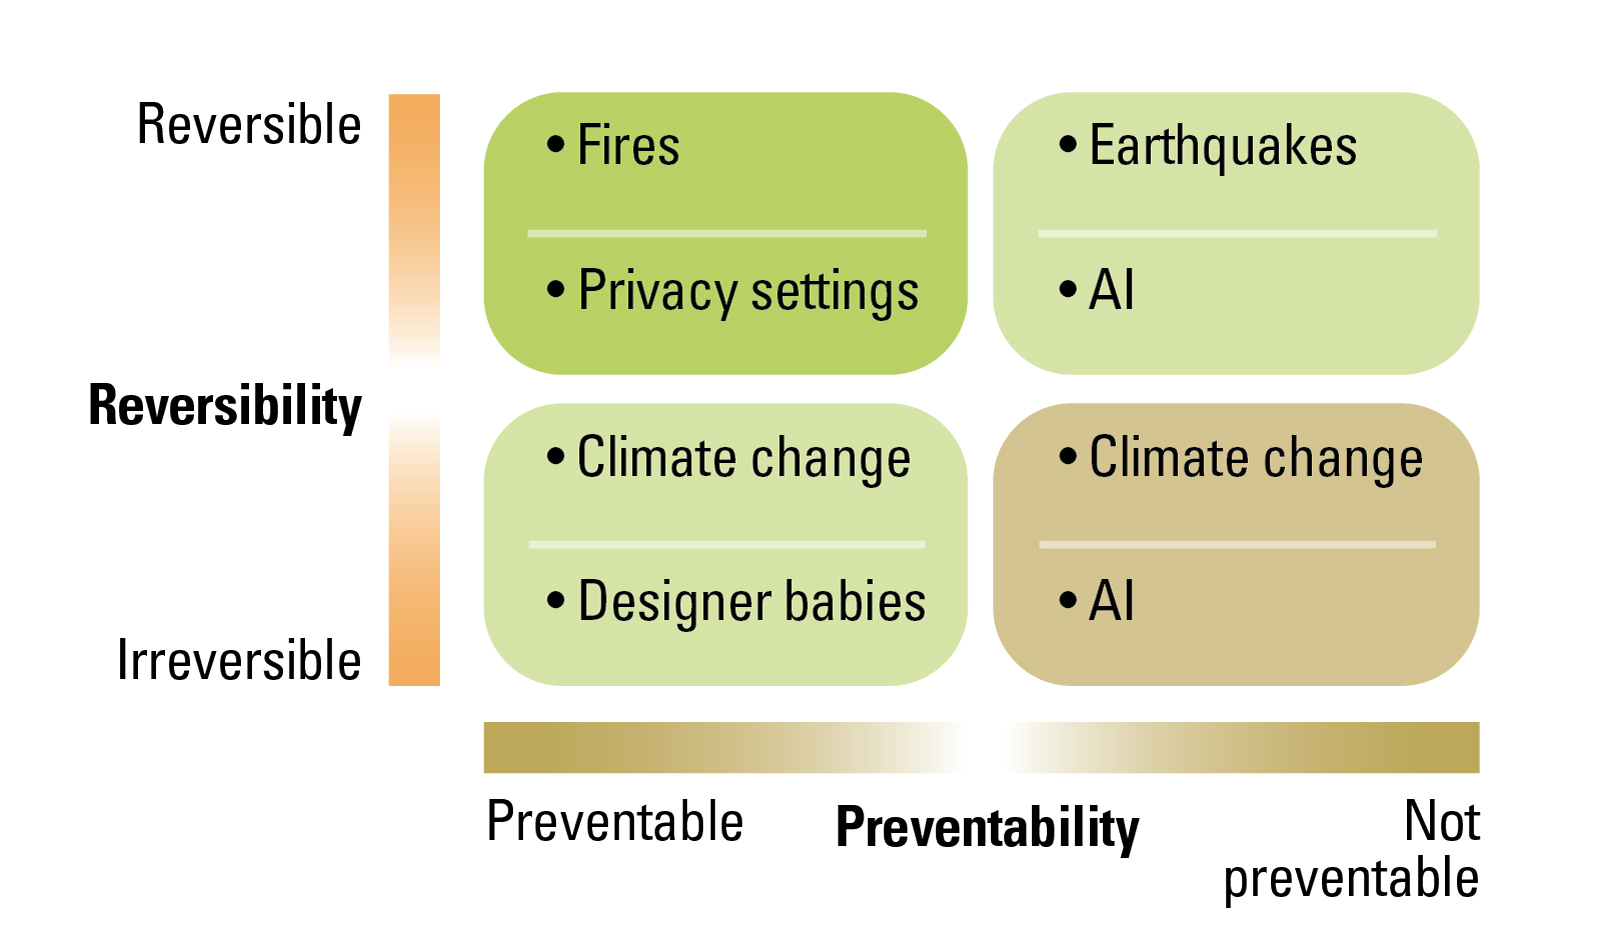 Reversibility and Preventability: Technology versus Natural Disasters